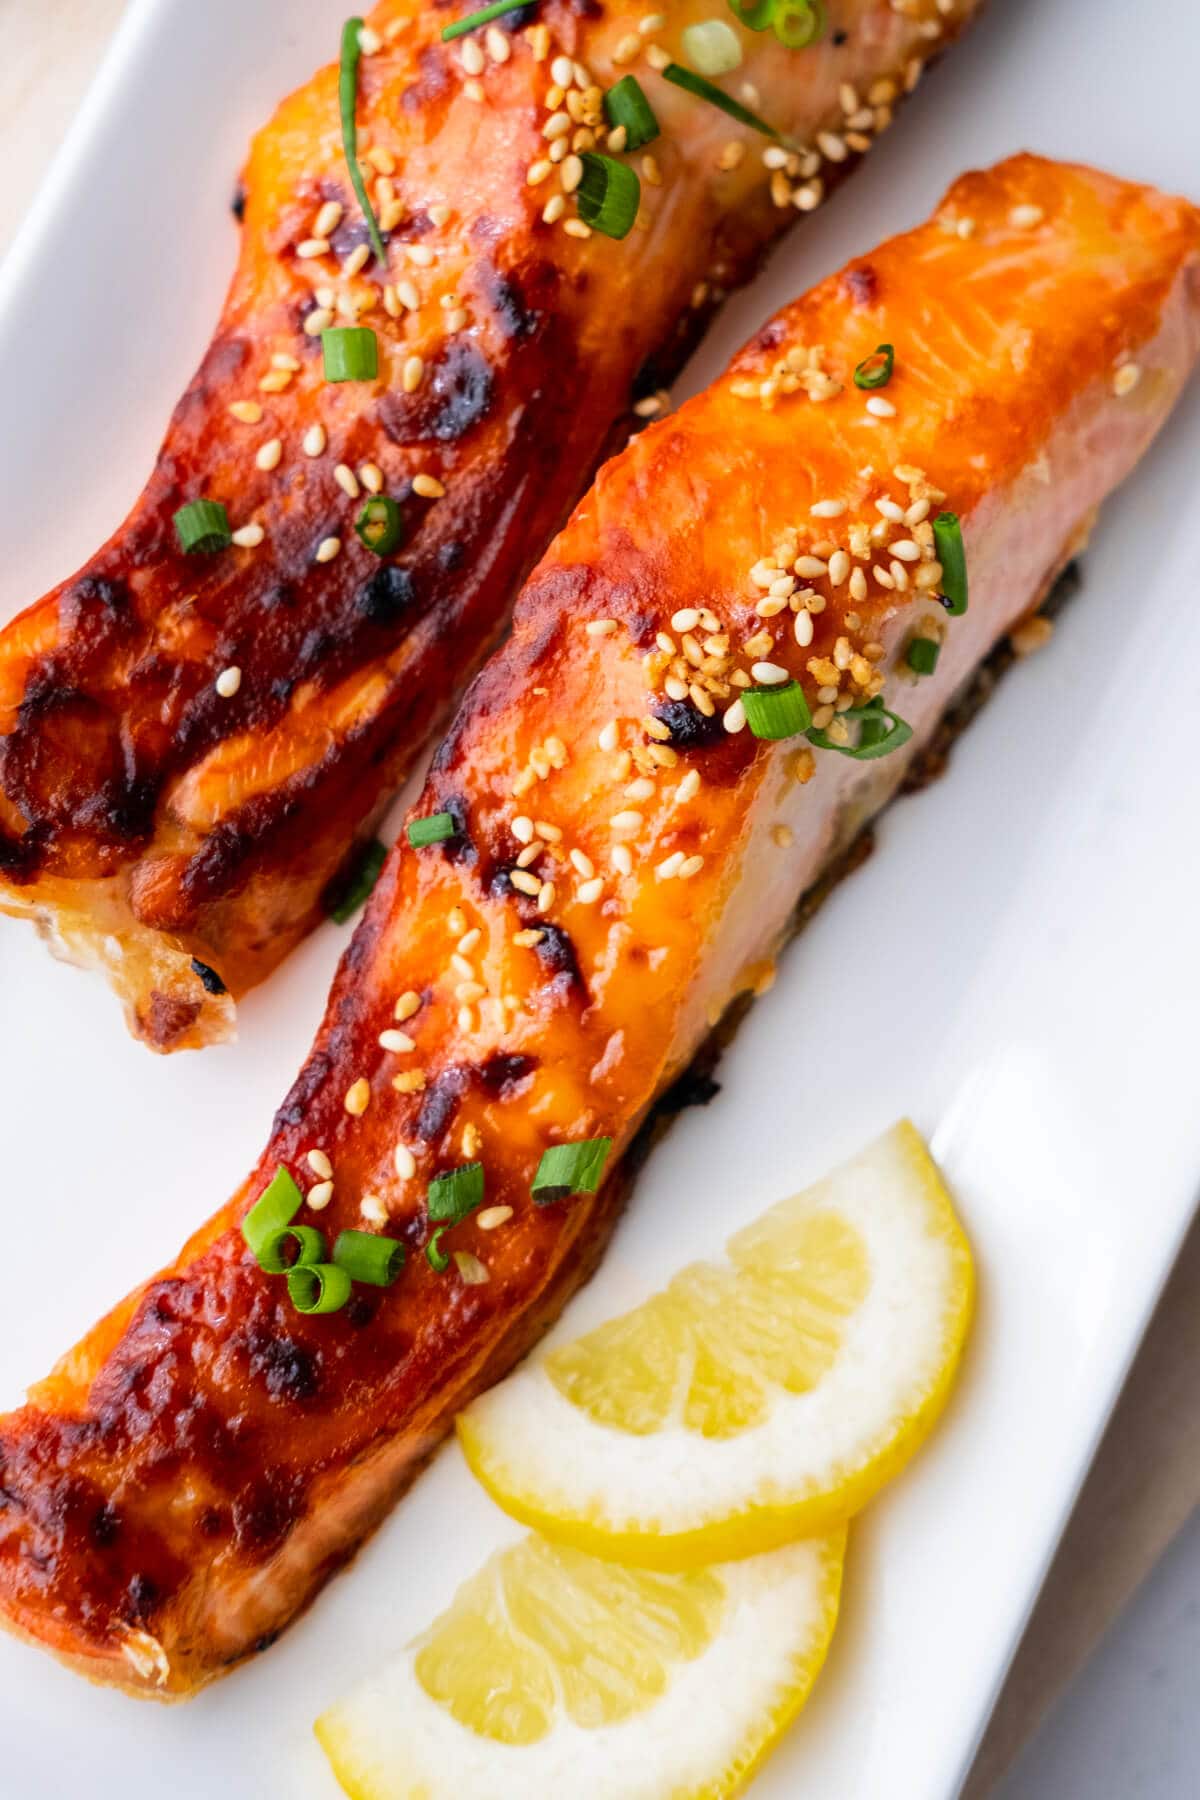 Japanese miso-glazed broiled salmon garnished with chopped scallions in a wooden serving dish.